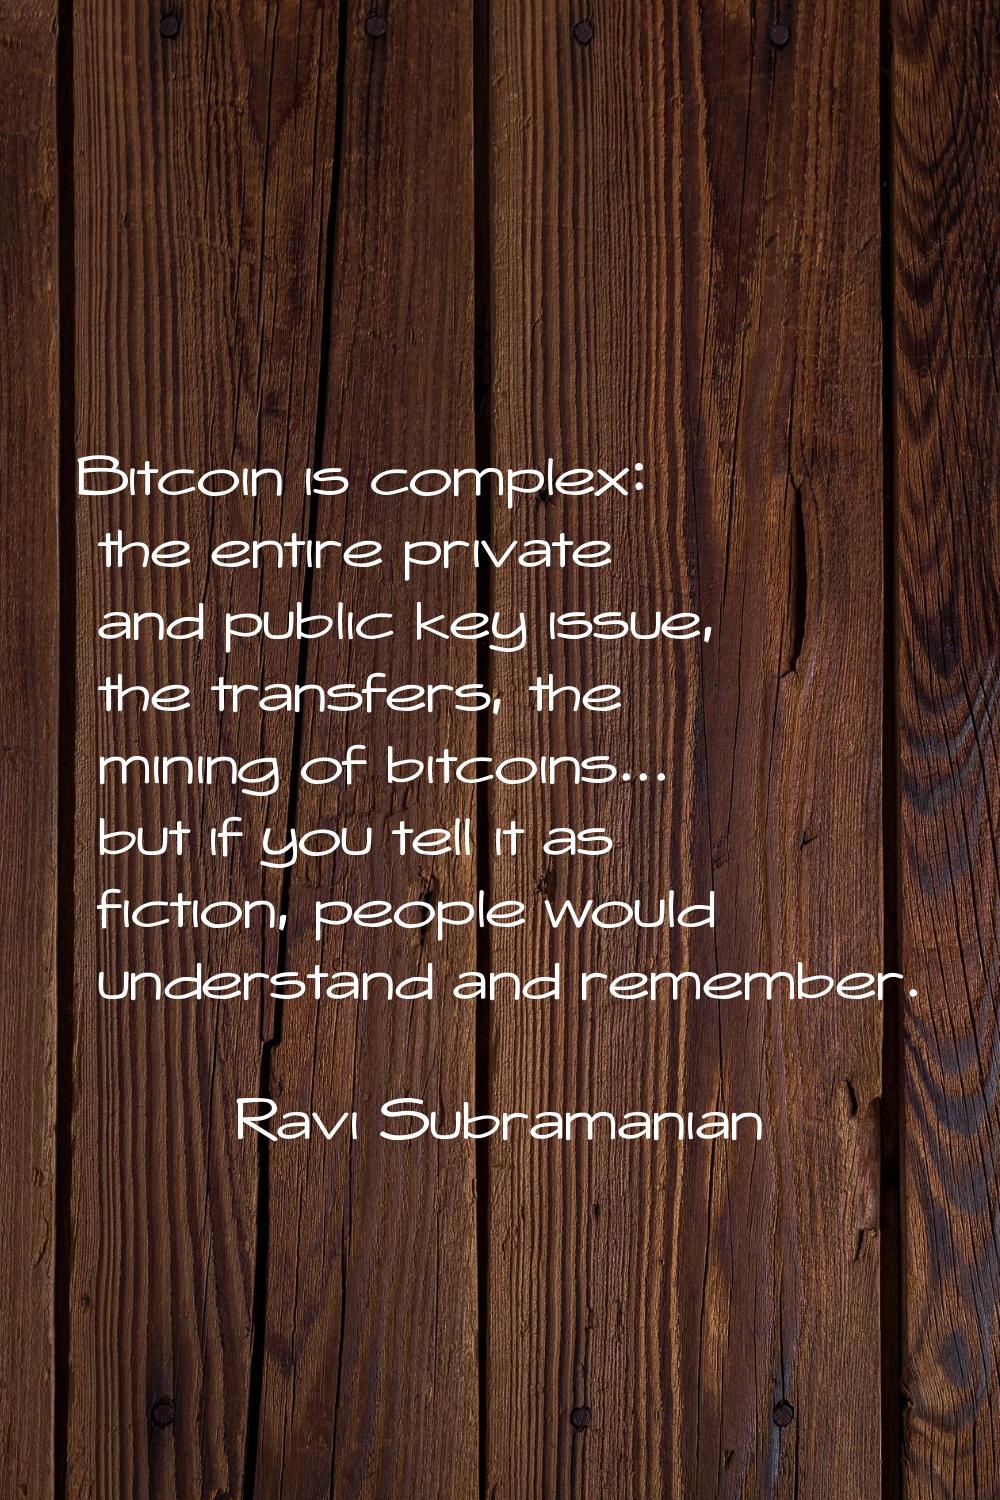 Bitcoin is complex: the entire private and public key issue, the transfers, the mining of bitcoins.